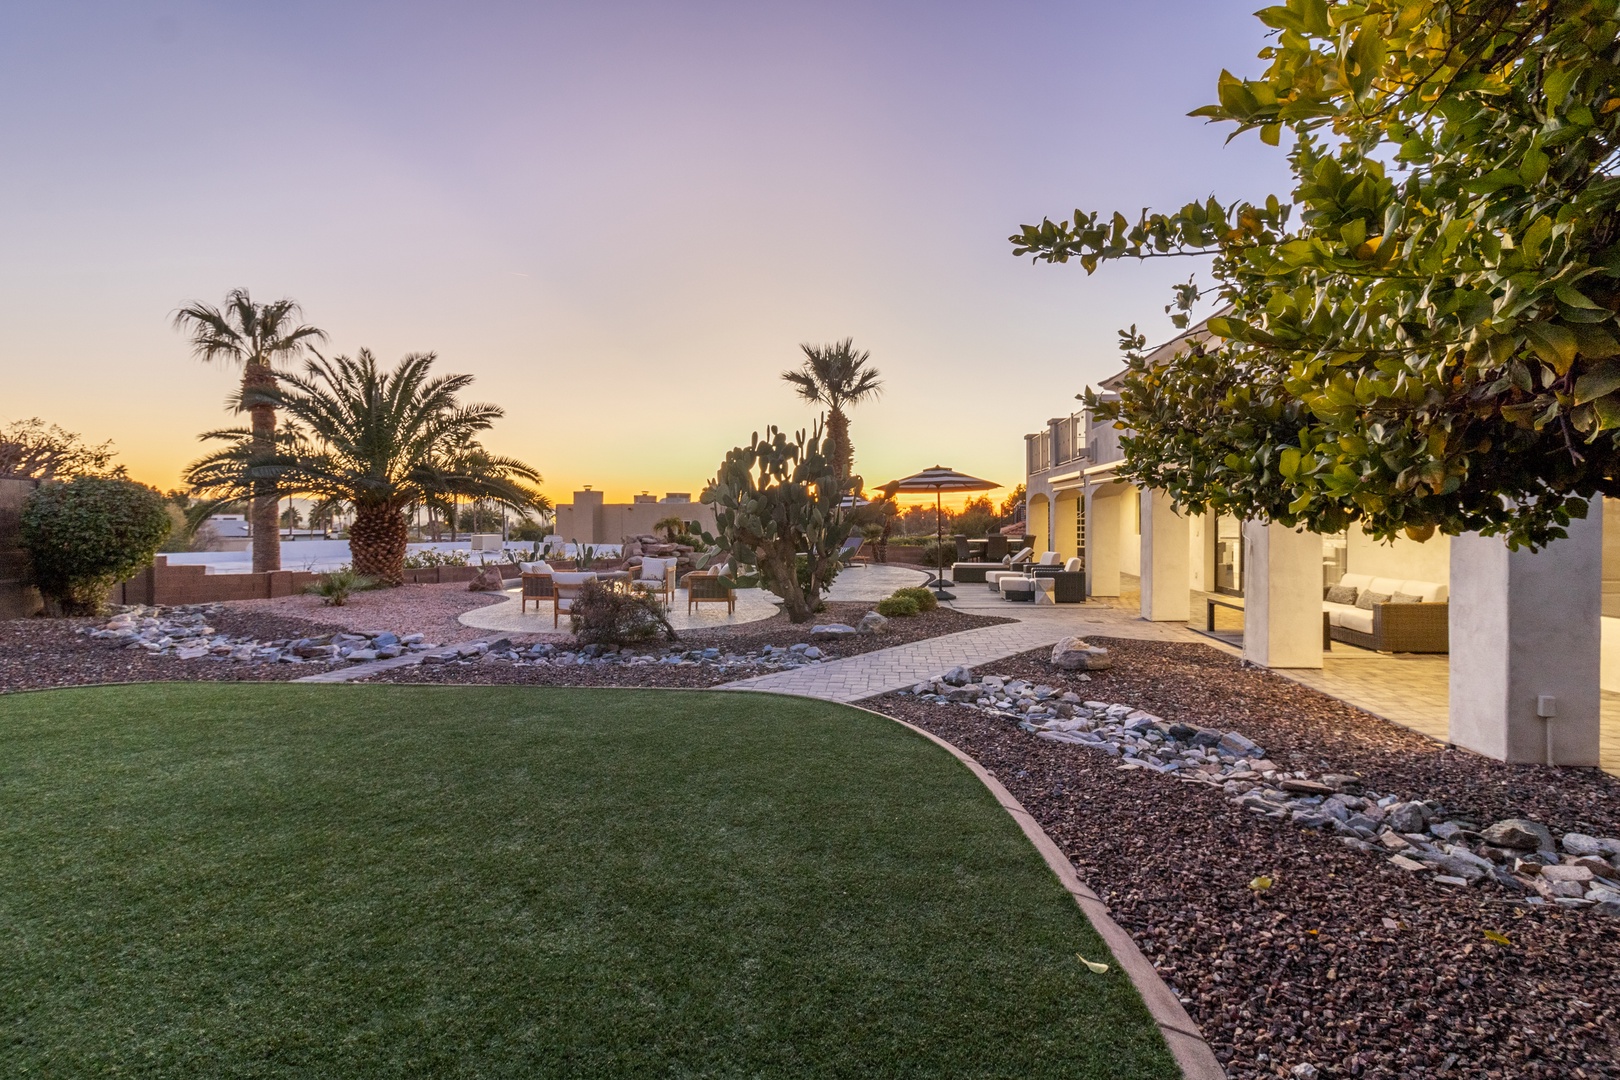 Phoenix Vacation Rentals, Majestic Mountain Views at Piestewa Peak Paradise - Kids or adults will love to have such great backyard